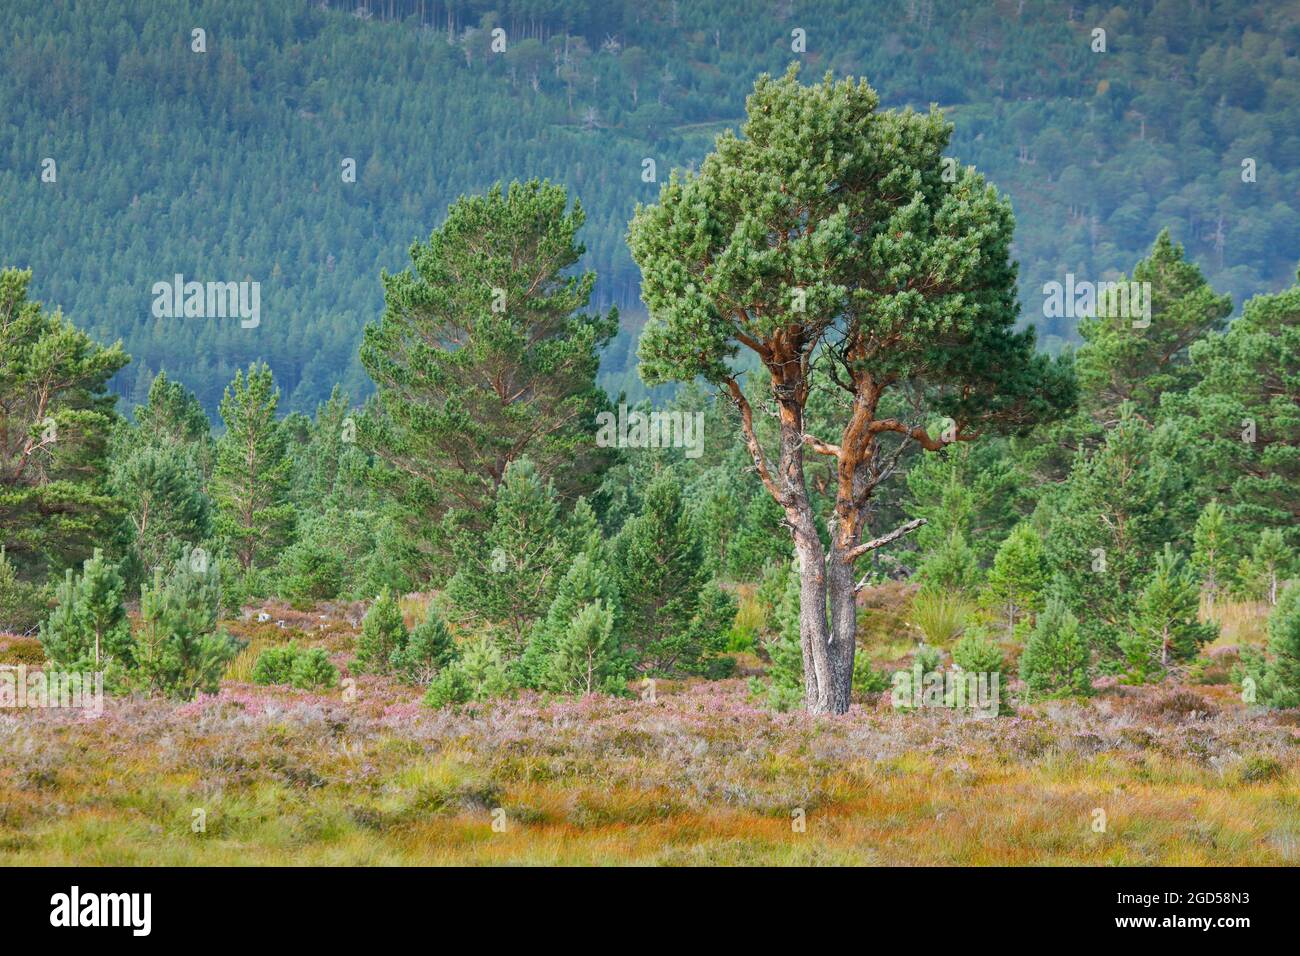 geography / travel, Great Britain, Scotland, Scots pine, Cairngorms n. P., Scotland, NO-EXCLUSIVE-USE FOR FOLDING-CARD-GREETING-CARD-POSTCARD-USE Stock Photo